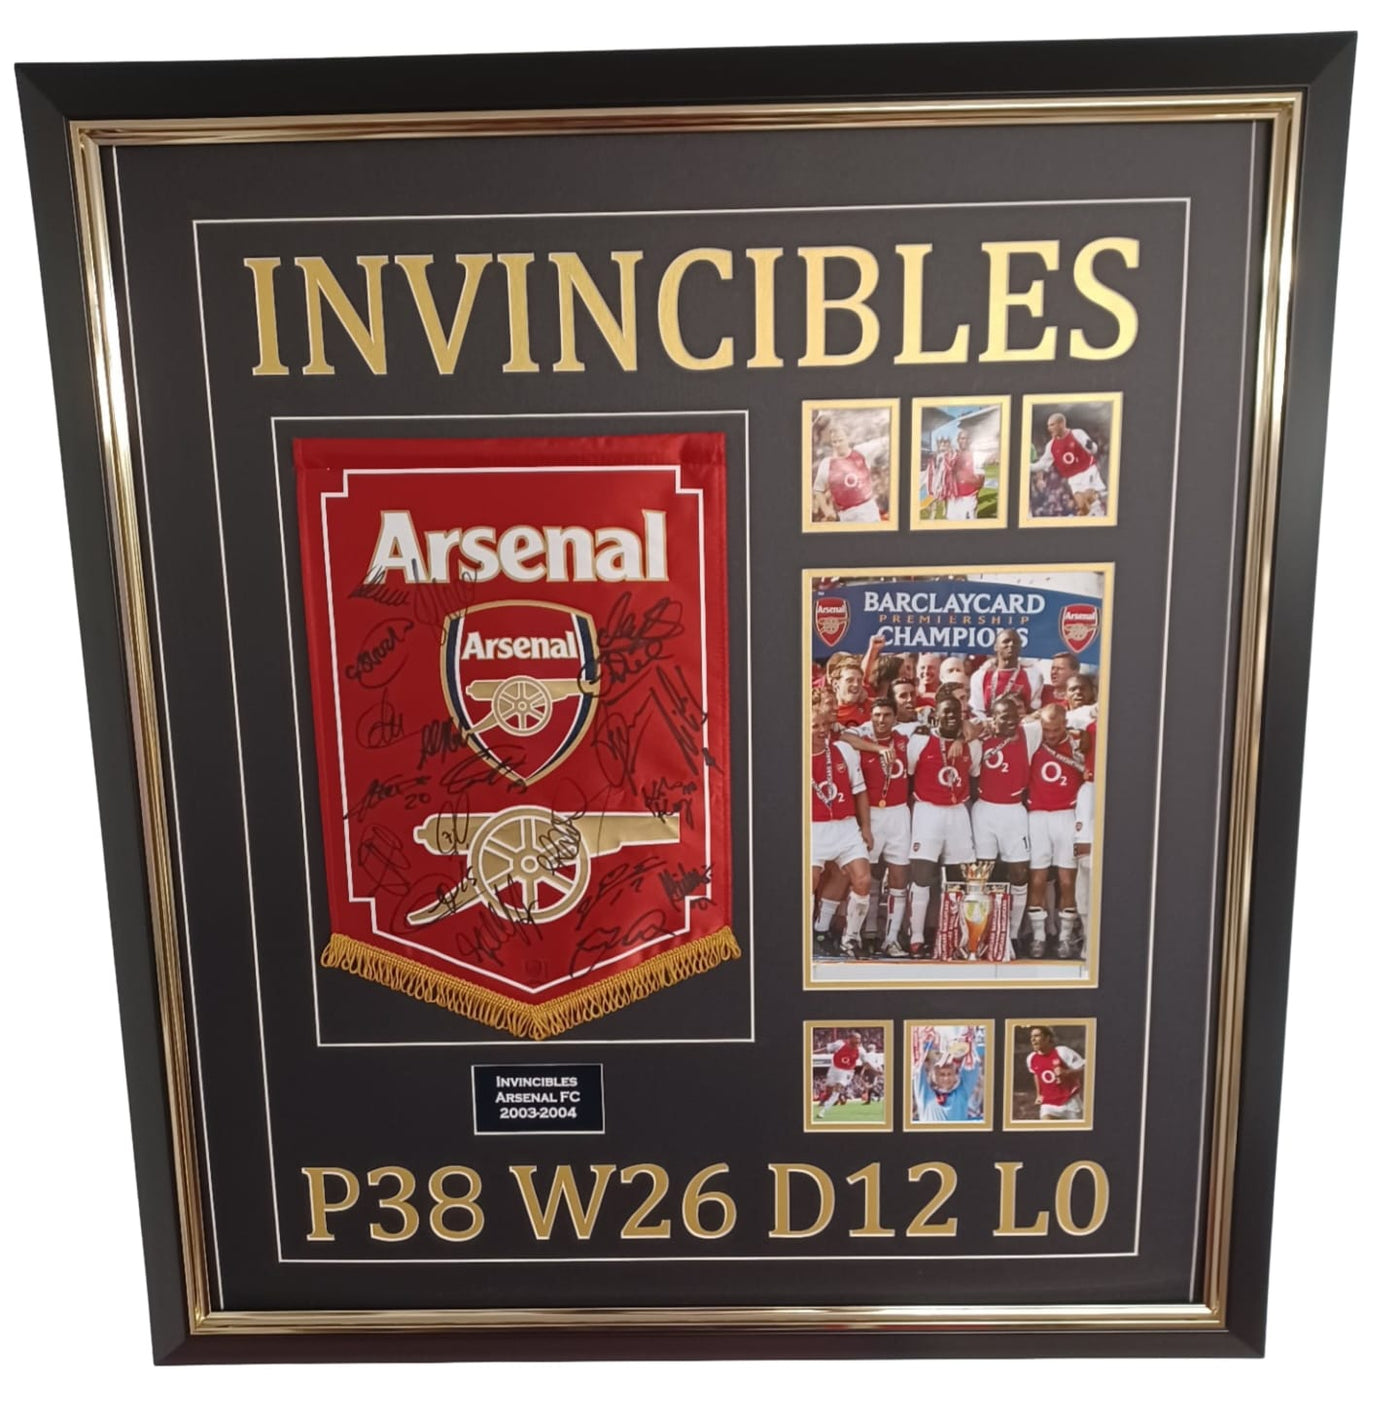 Invincibles signed Pennant